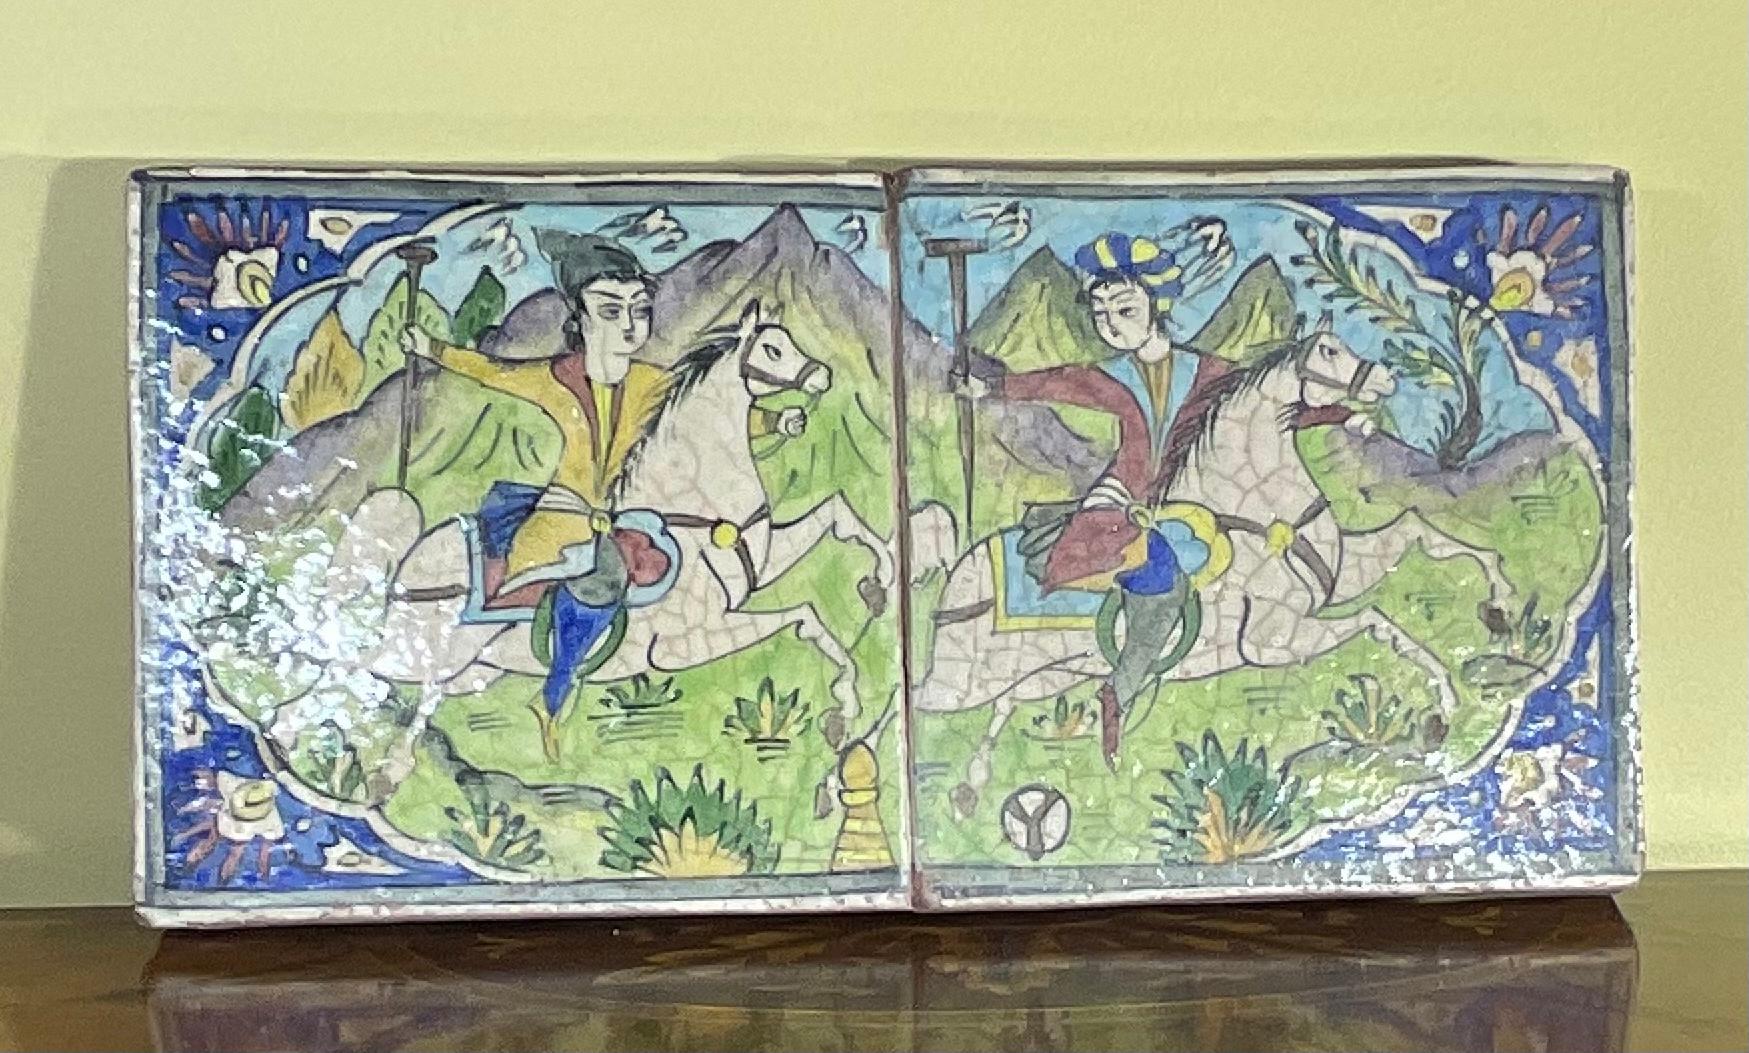 Vintage Polo Players Ceramic Persian Tile Wall Hanging 2